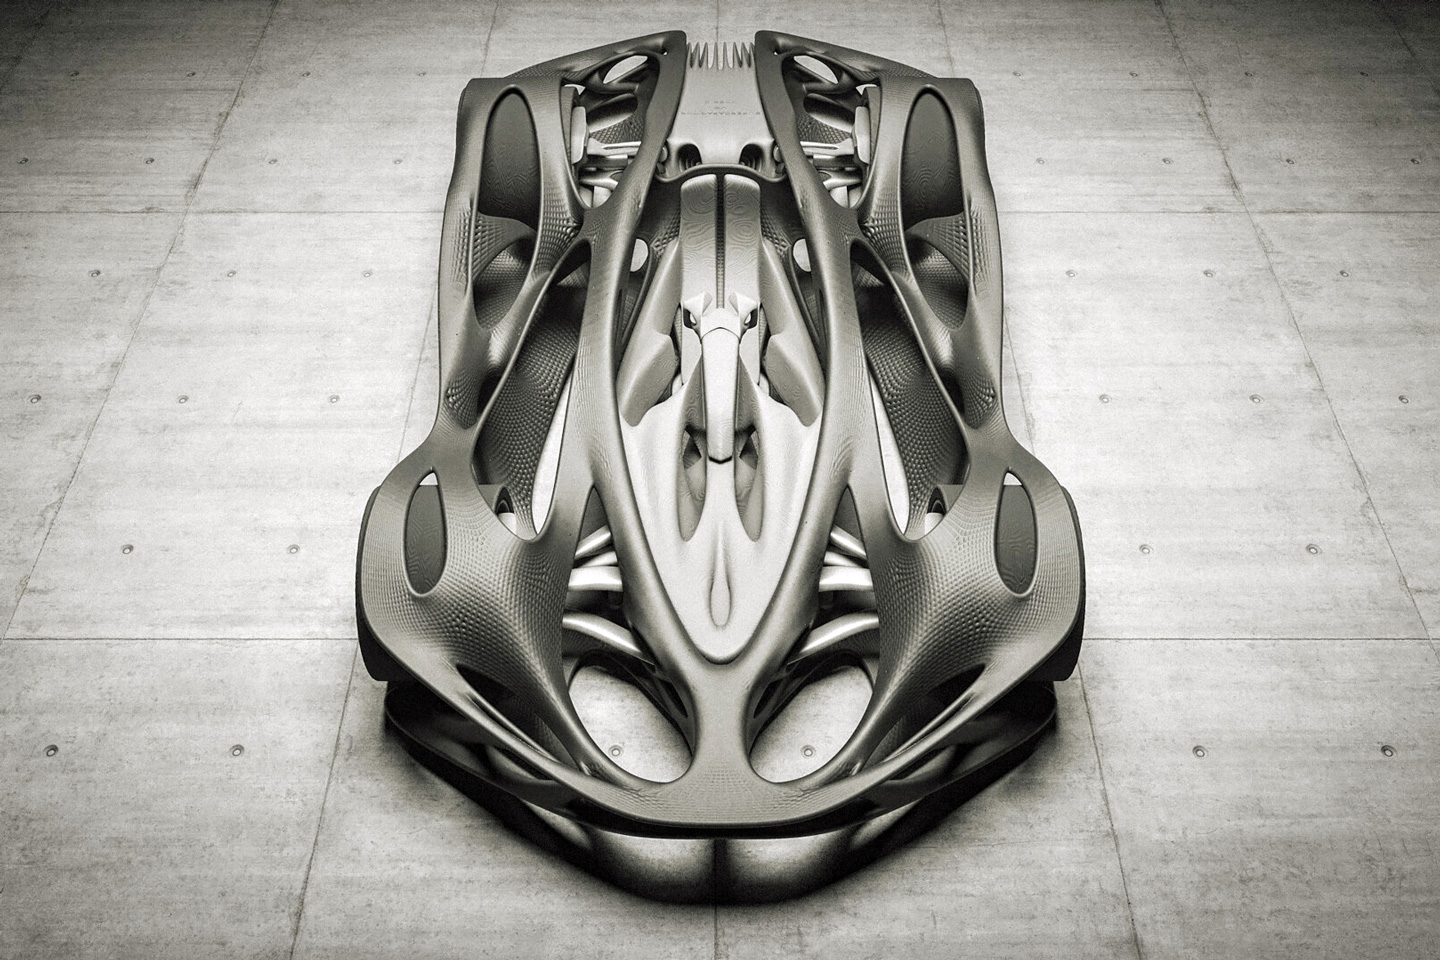 #This futuristic car was almost entirely designed by computer algorithms